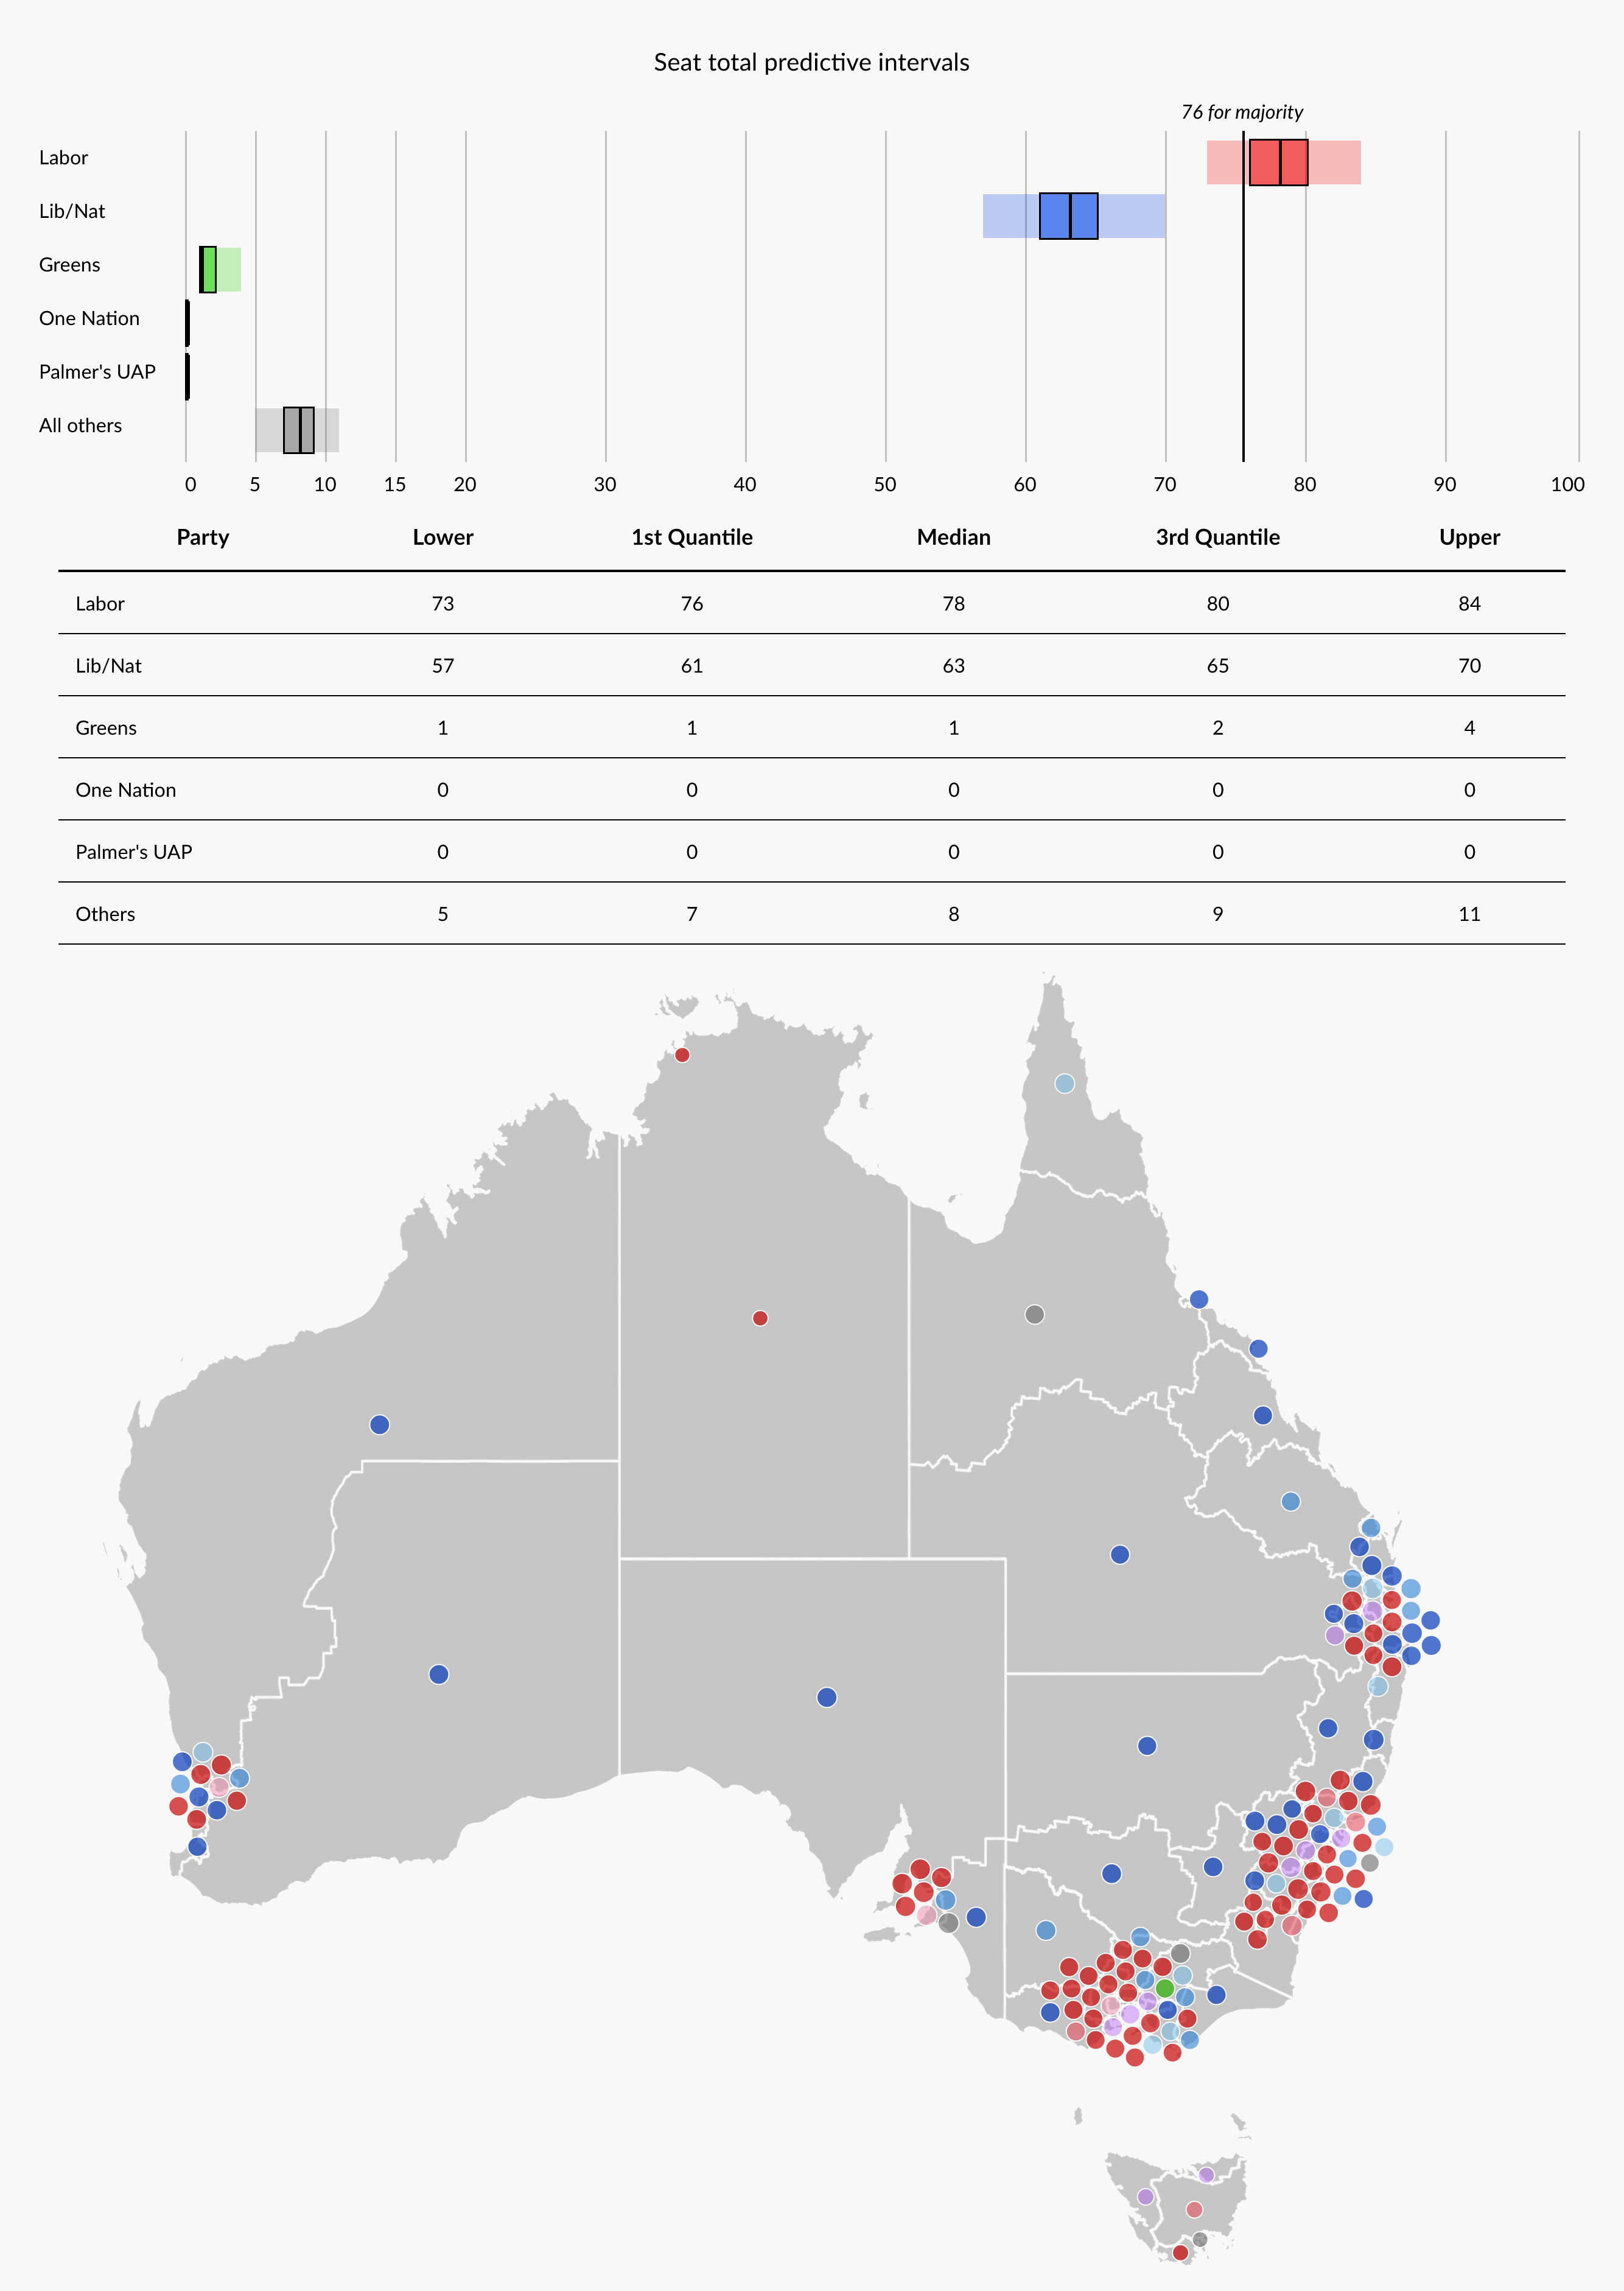 Simulated electoral map if Labor wins 52 on 2pp basis